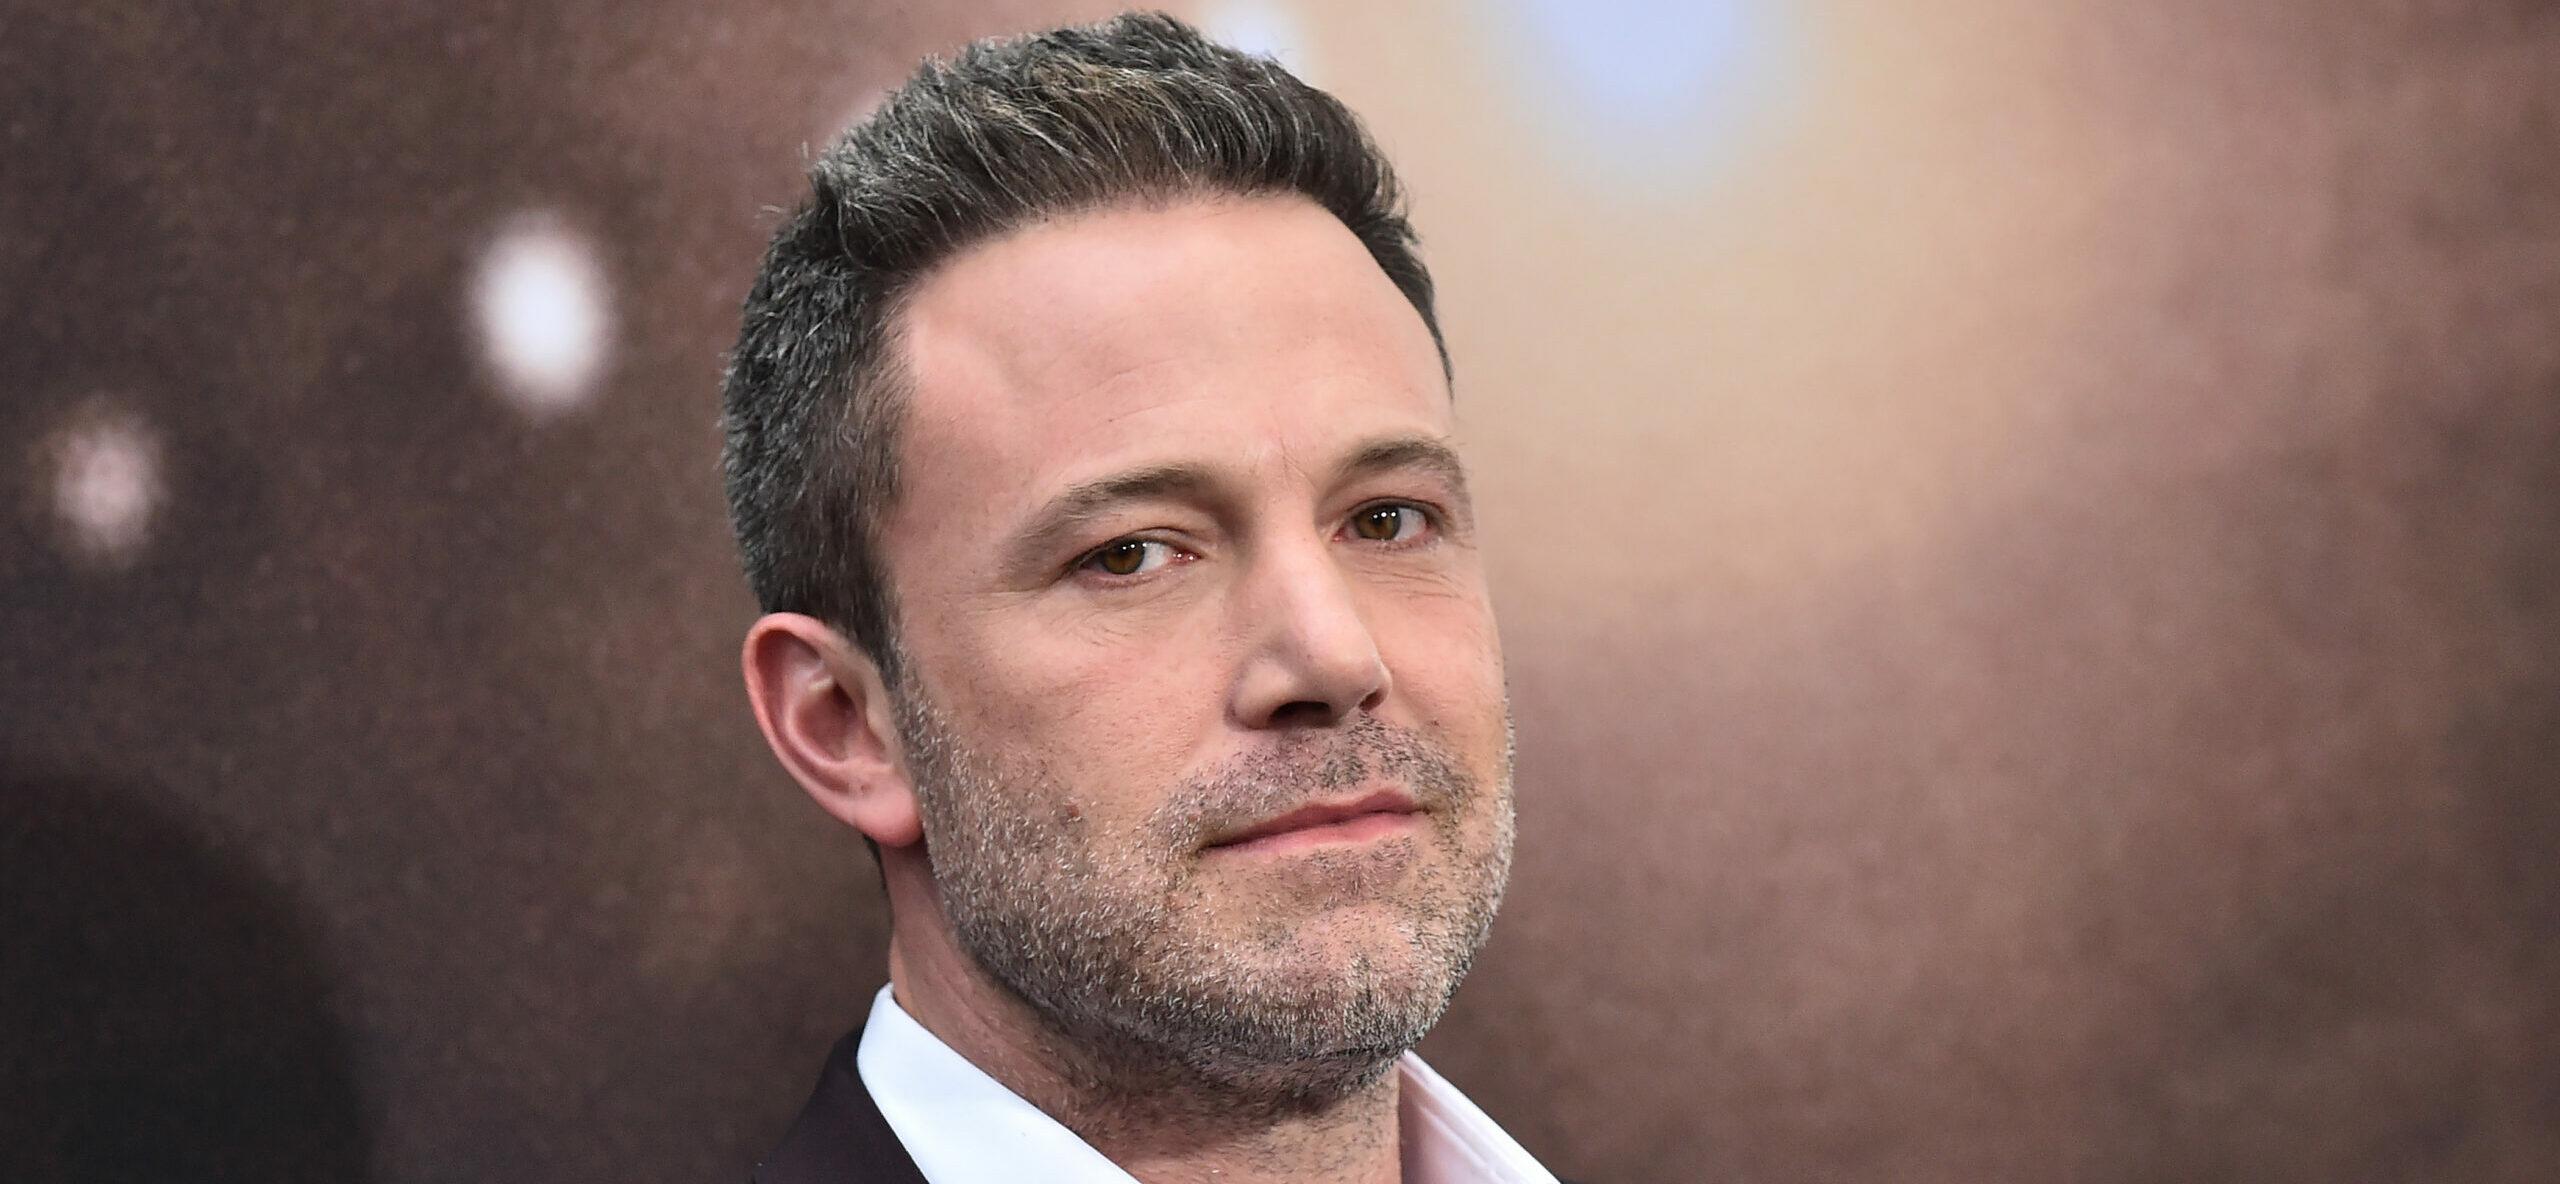 Ben Affleck Calls Out Netflix For Choosing Quantity Over Quality In Movie Making